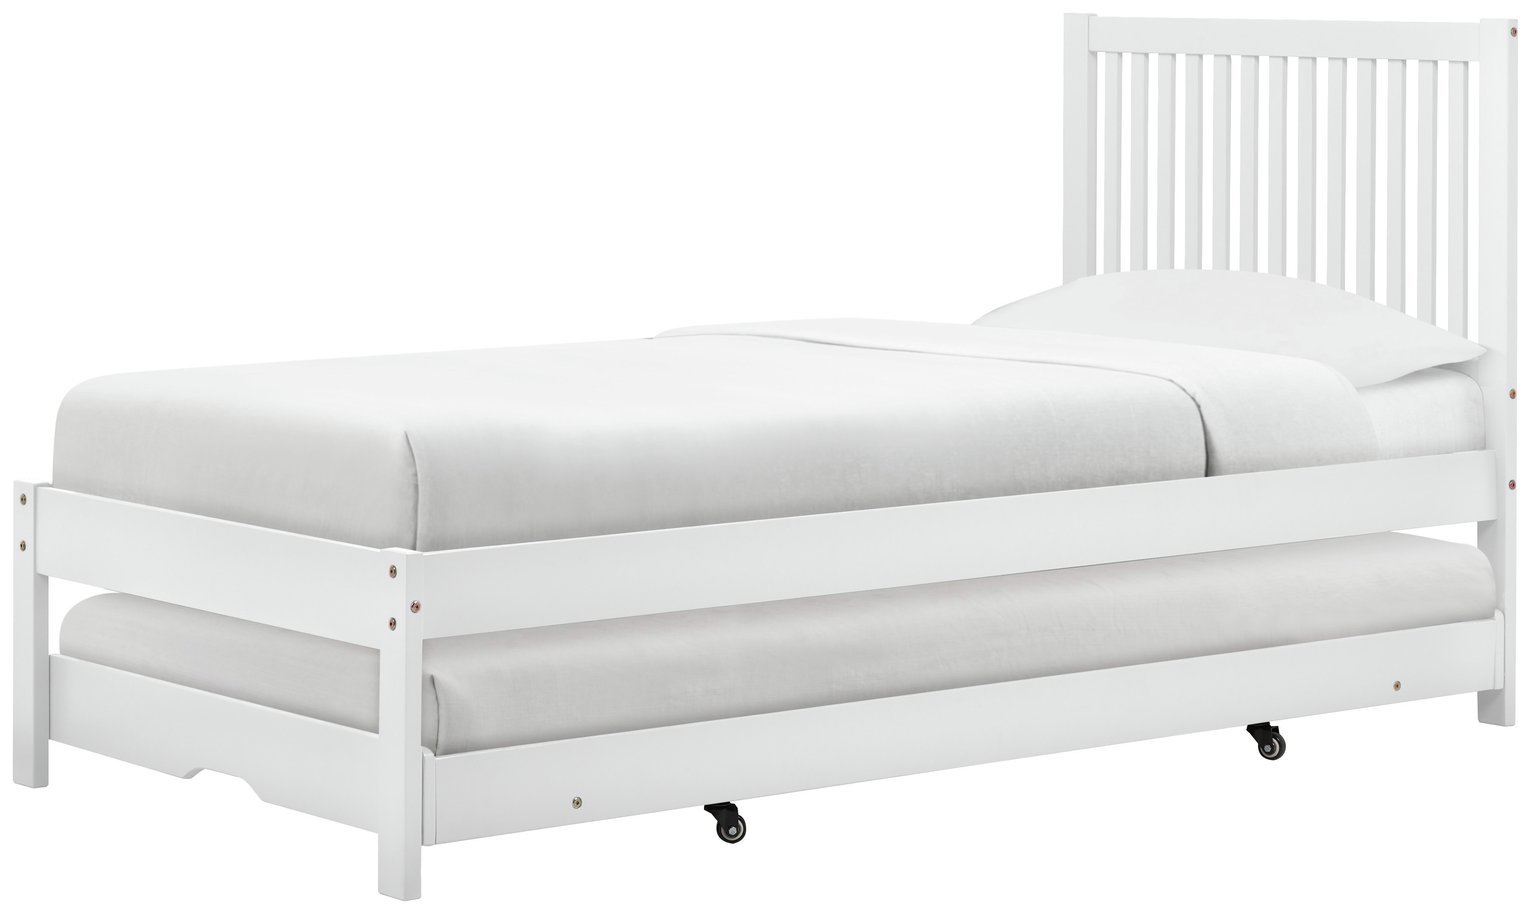 Birlea Buxton Single Bed Frame With Trundle - White